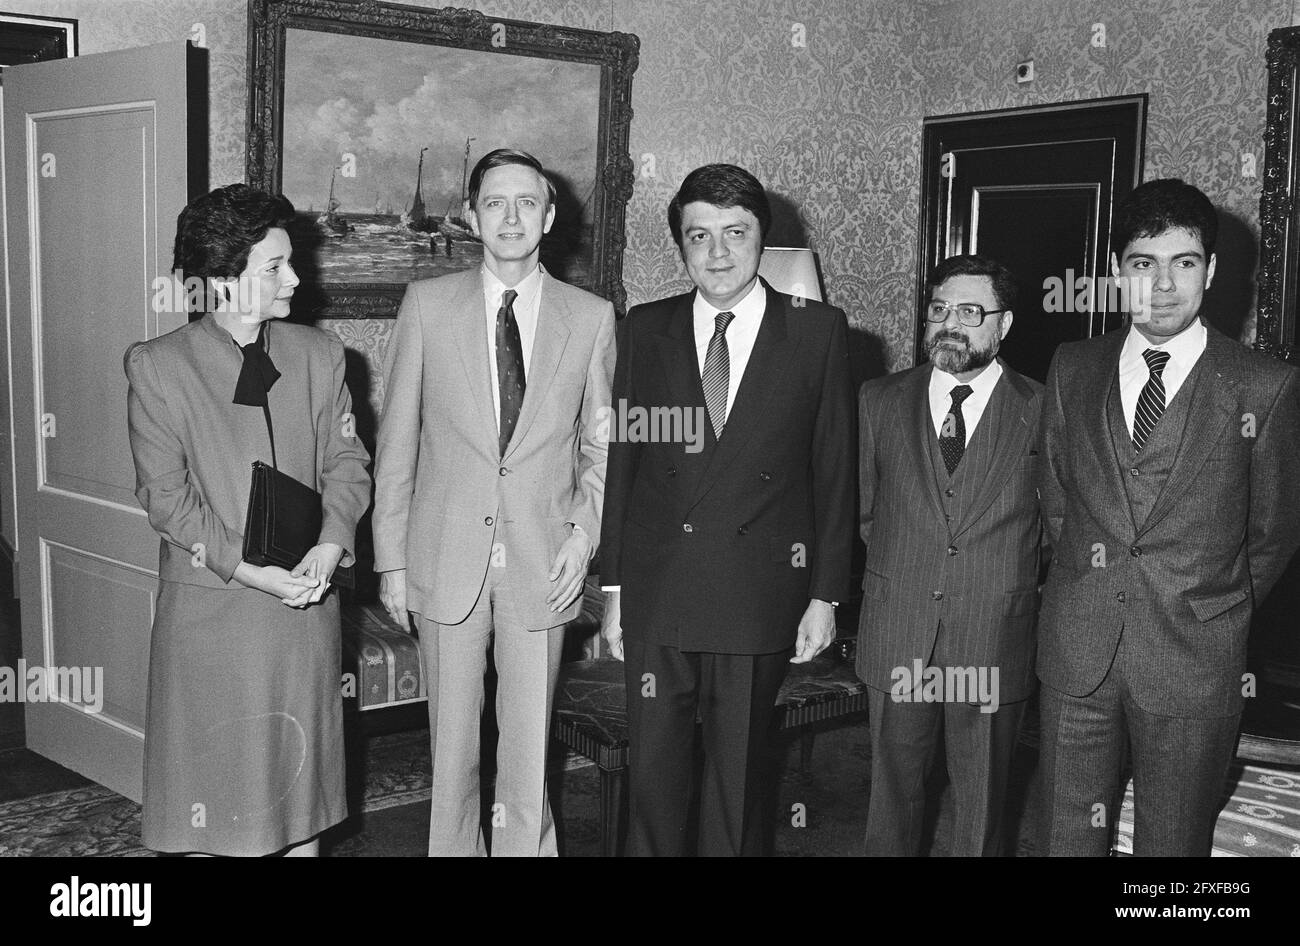 House of Representatives President Dolman (m) received today Nora Astorga (vice minister BuiZa Nicaraqua) (l) and Sergio Ramirez (member of the Nat. Government Nicaraqua), May 3, 1982, politicians, The Netherlands, 20th century press agency photo, news to remember, documentary, historic photography 1945-1990, visual stories, human history of the Twentieth Century, capturing moments in time Stock Photo